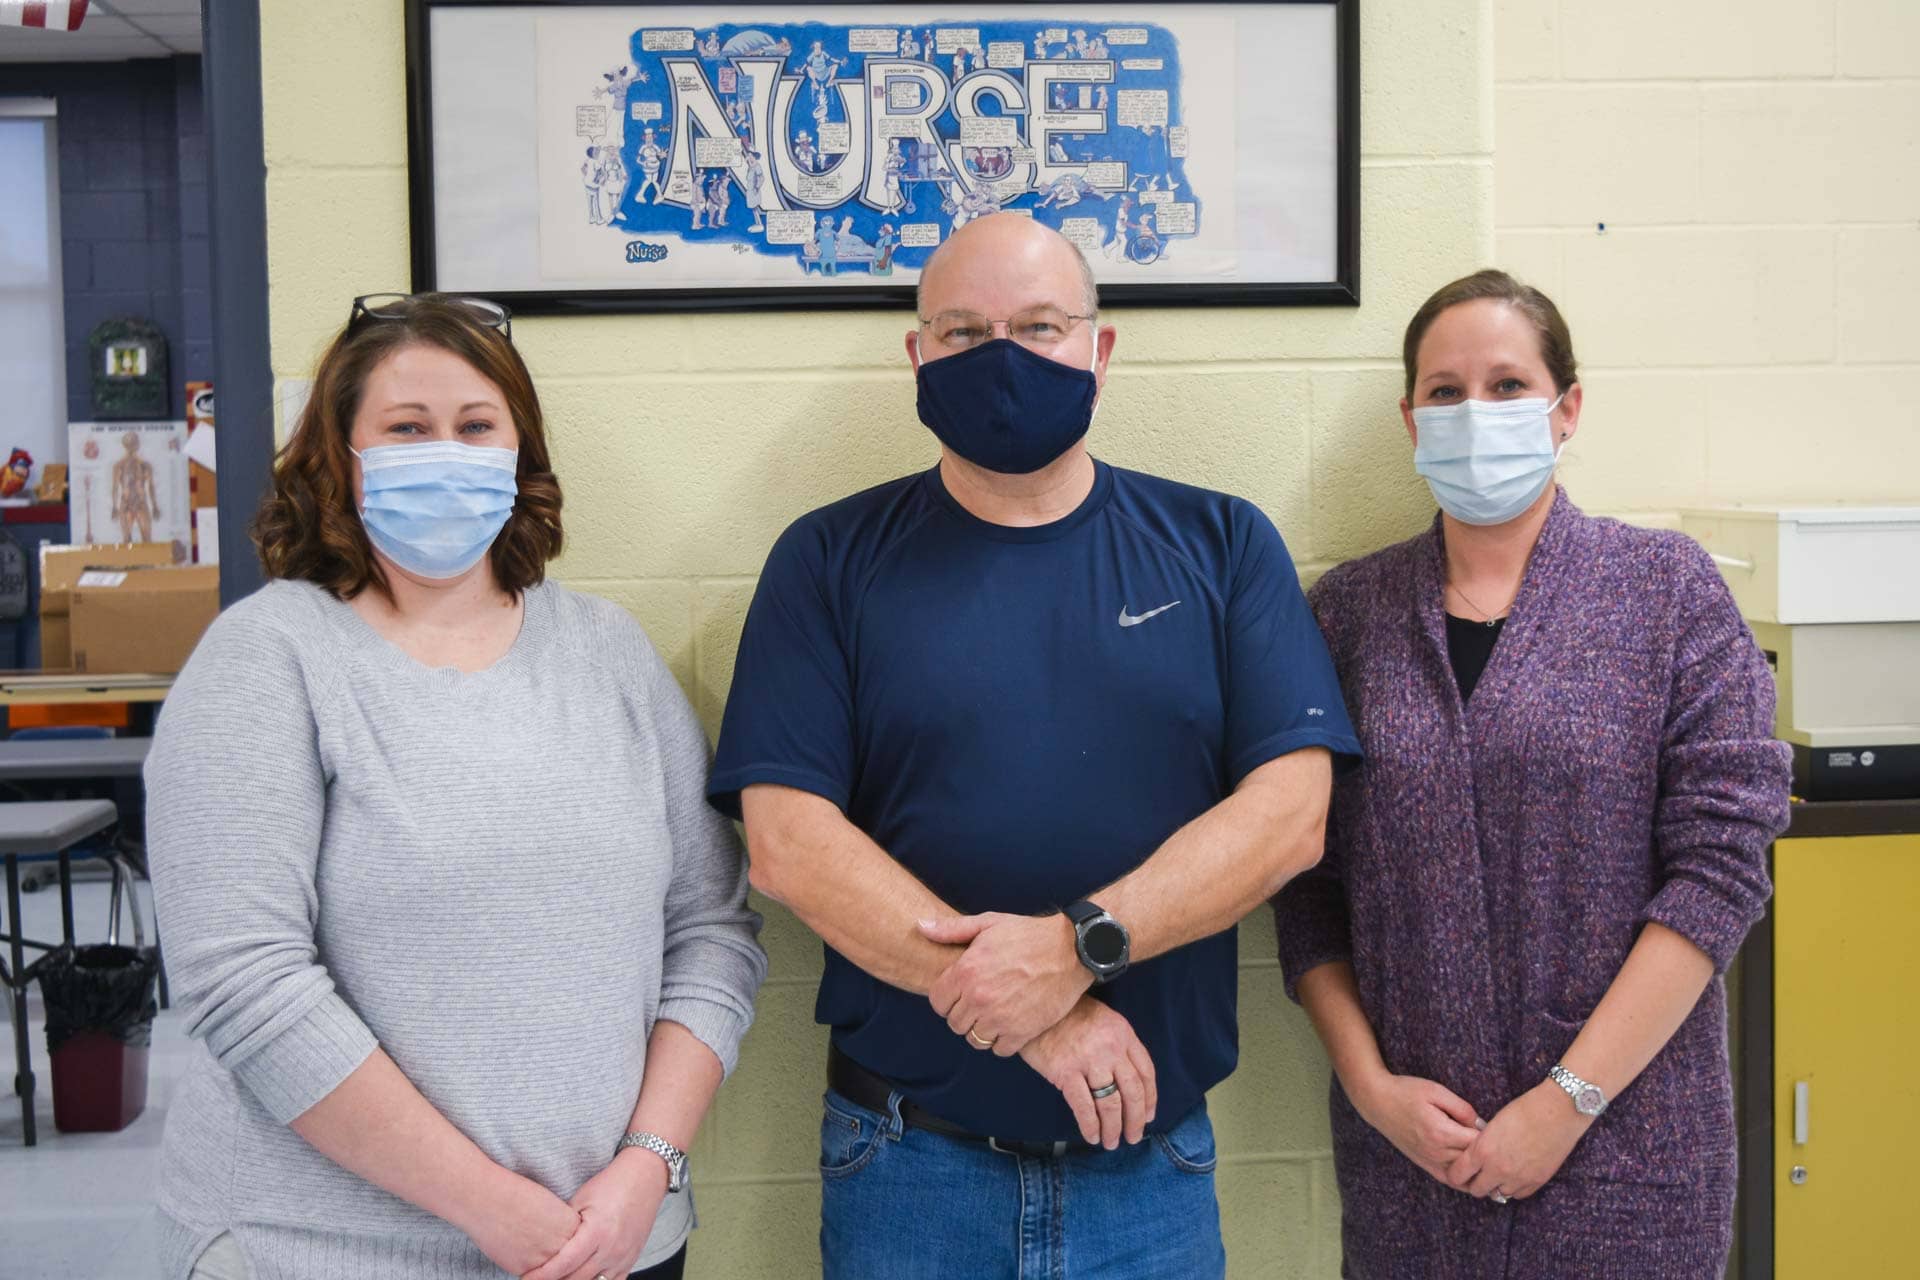 The LPN program at Fred Eberle Technical Center gives students a great way to enter the medical profession. Pictured are the LPN staff, including nursing instructor Rheanna Davis, LPN coordinator Ryan Hines and nursing instructor Kendel Guthrie.